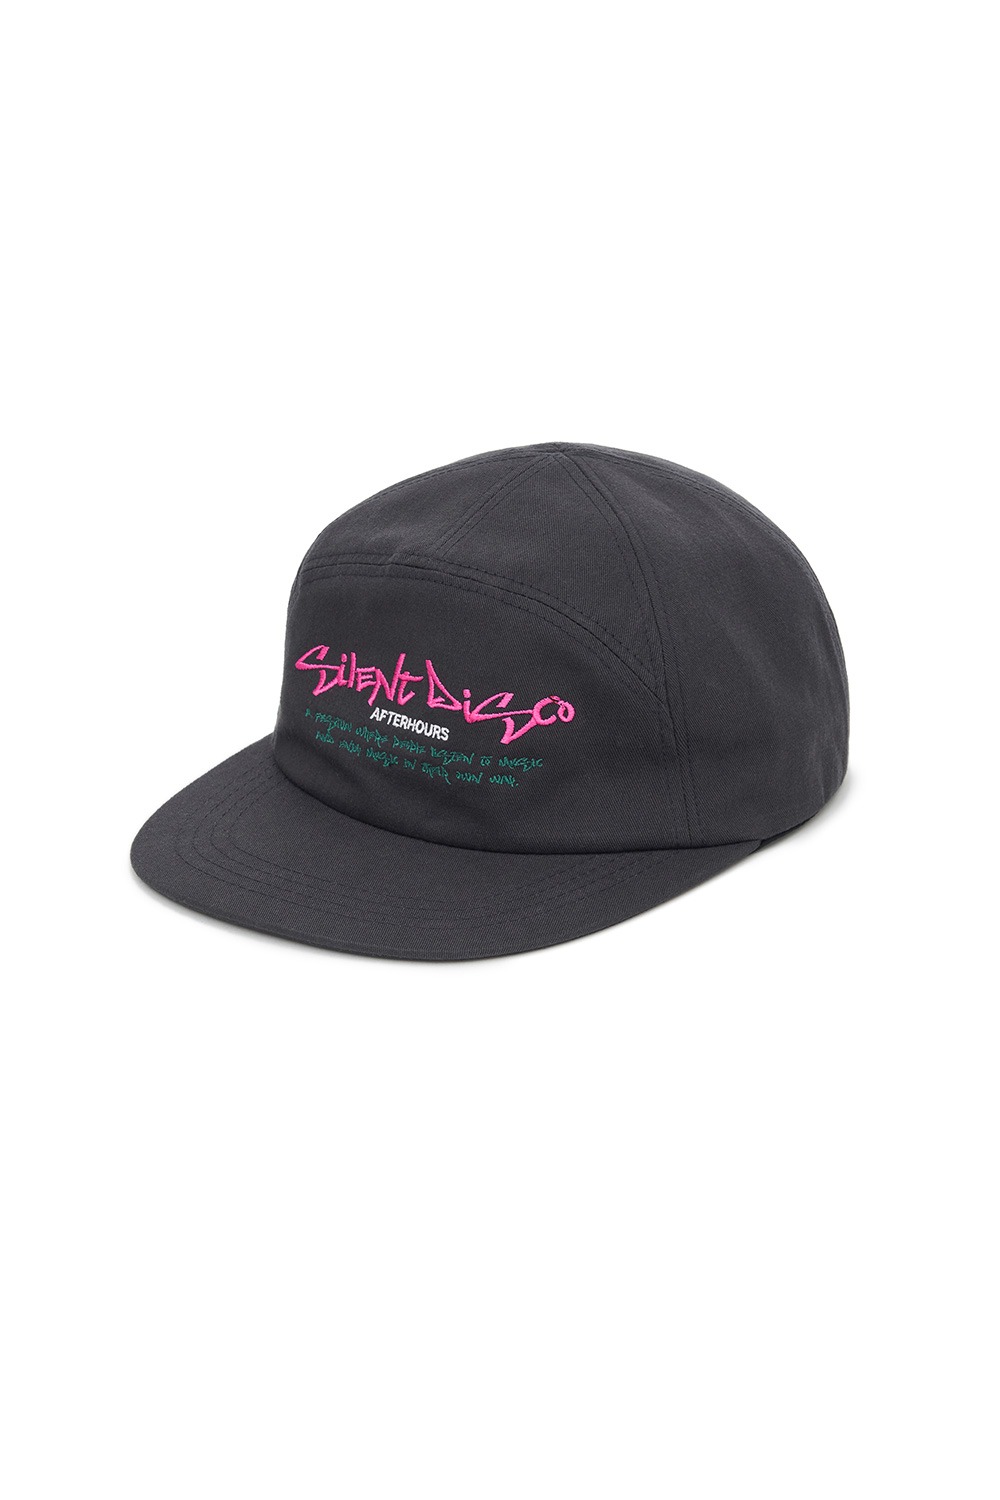 COTTON EMBROIDERED CAP (CHARCOAL)